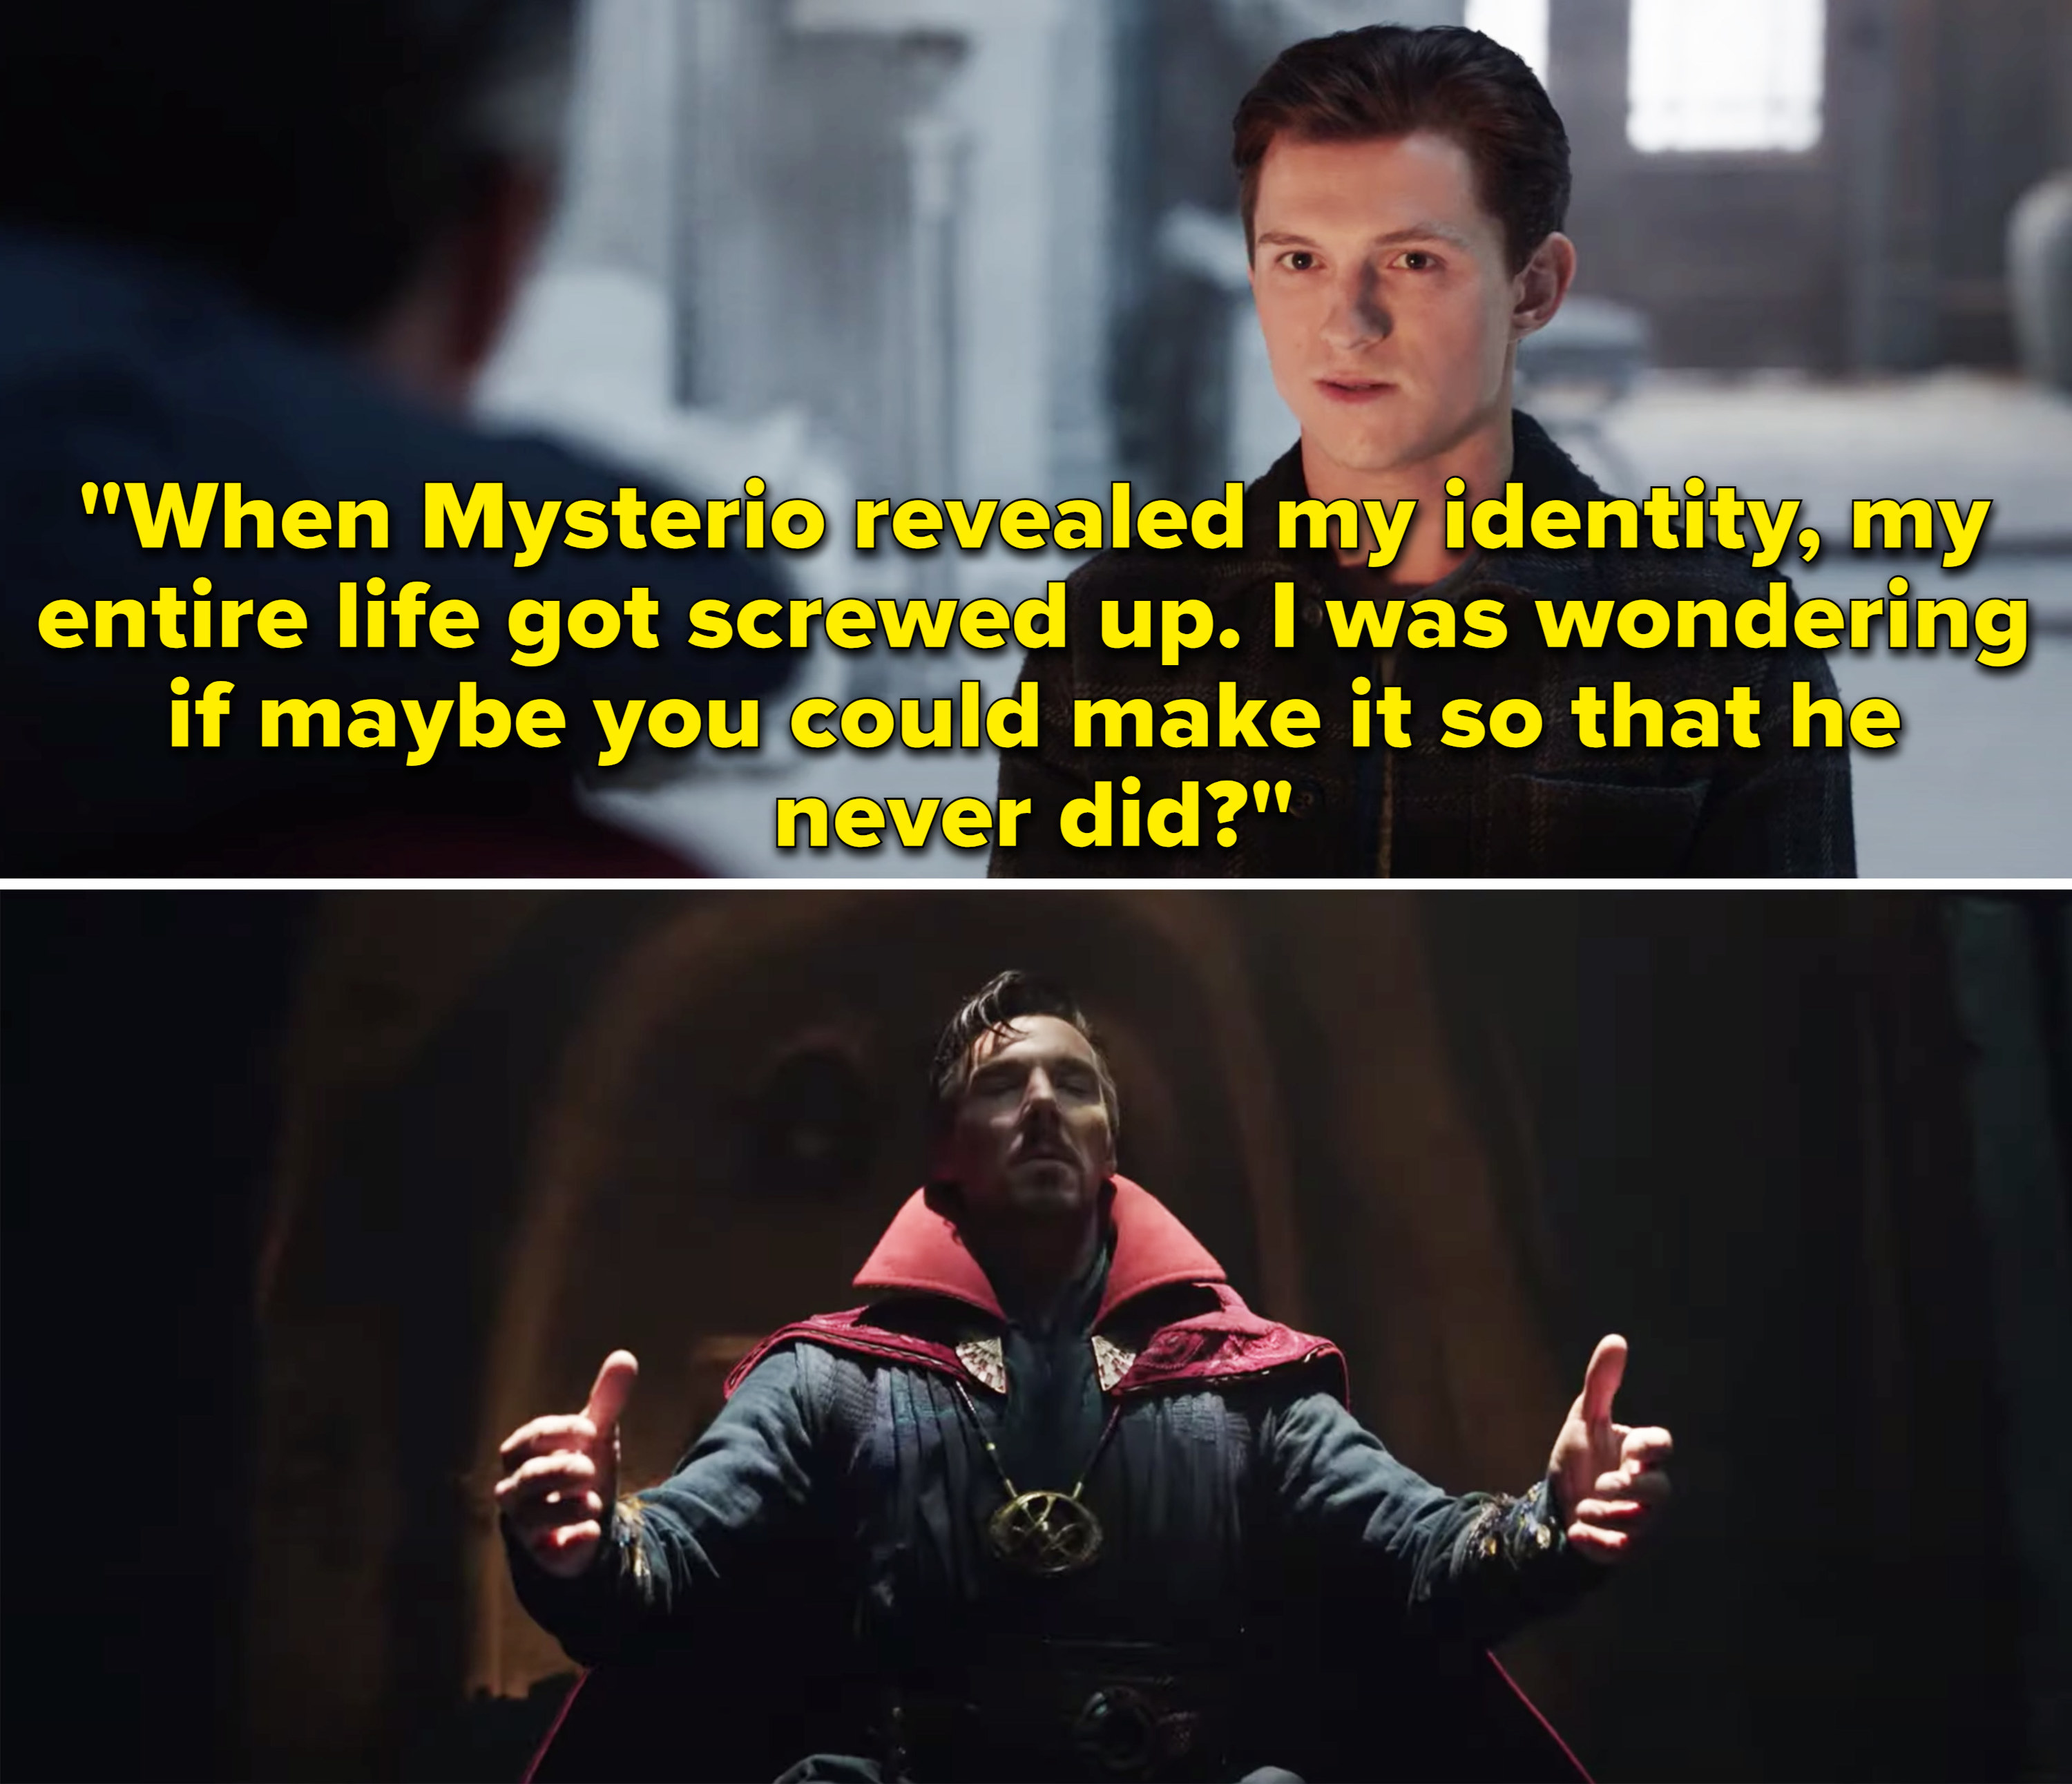 Peter asking Doctor Strange, &quot;When Mysterio revealed my identity, my entire life got screwed up. I was wondering if maybe you could make it so that he never did?&quot;